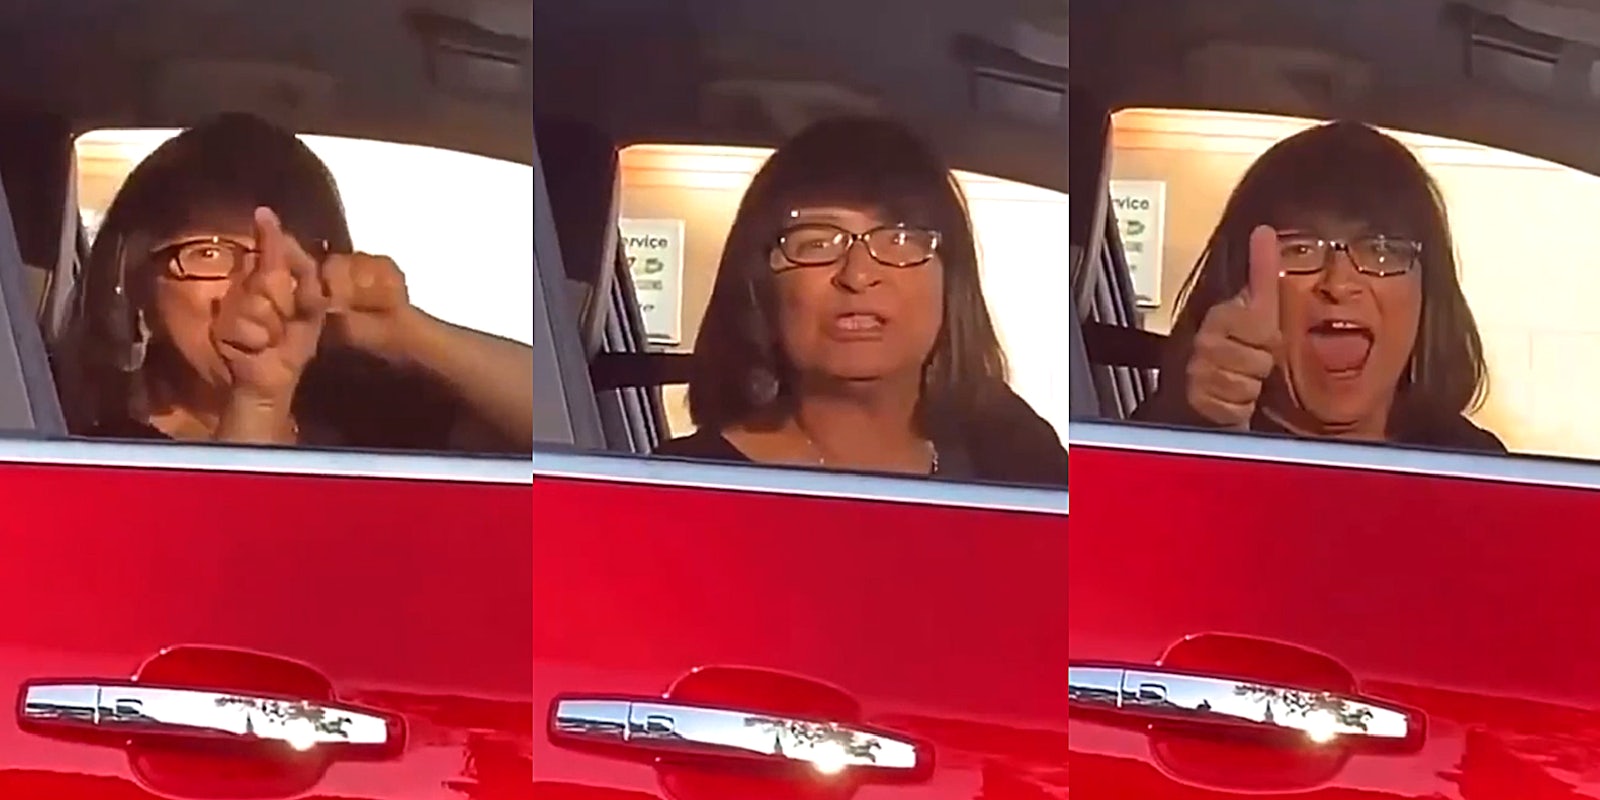 woman dancing and chanting racial slurs at other drivers